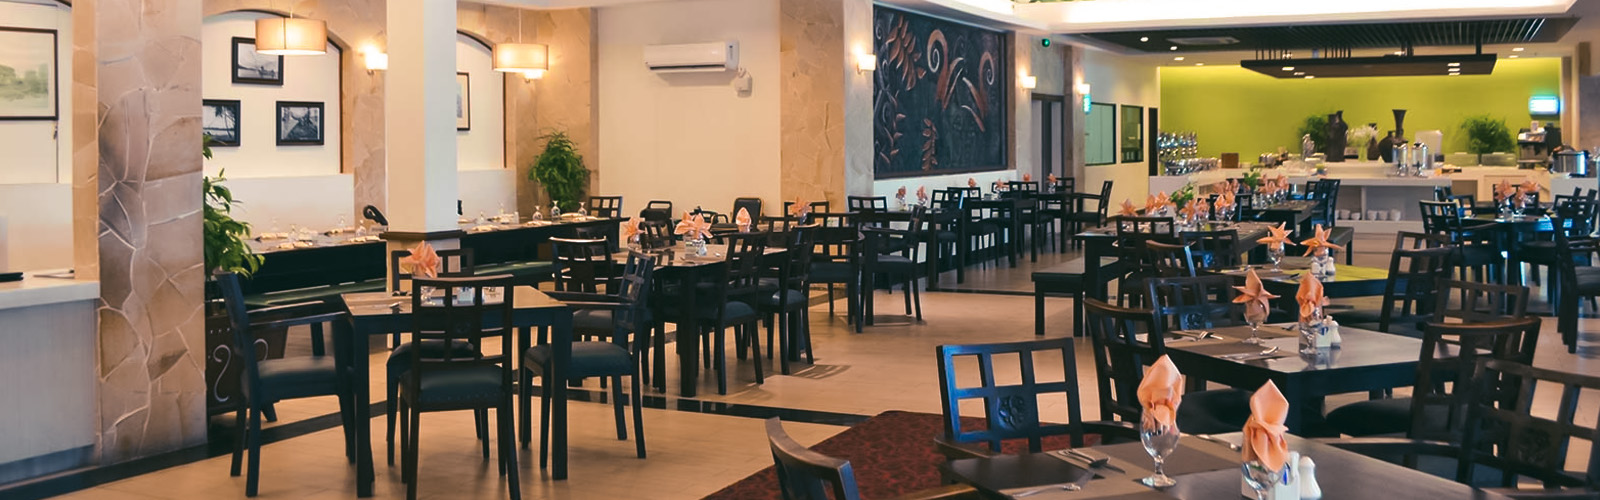 Cafes In Astana